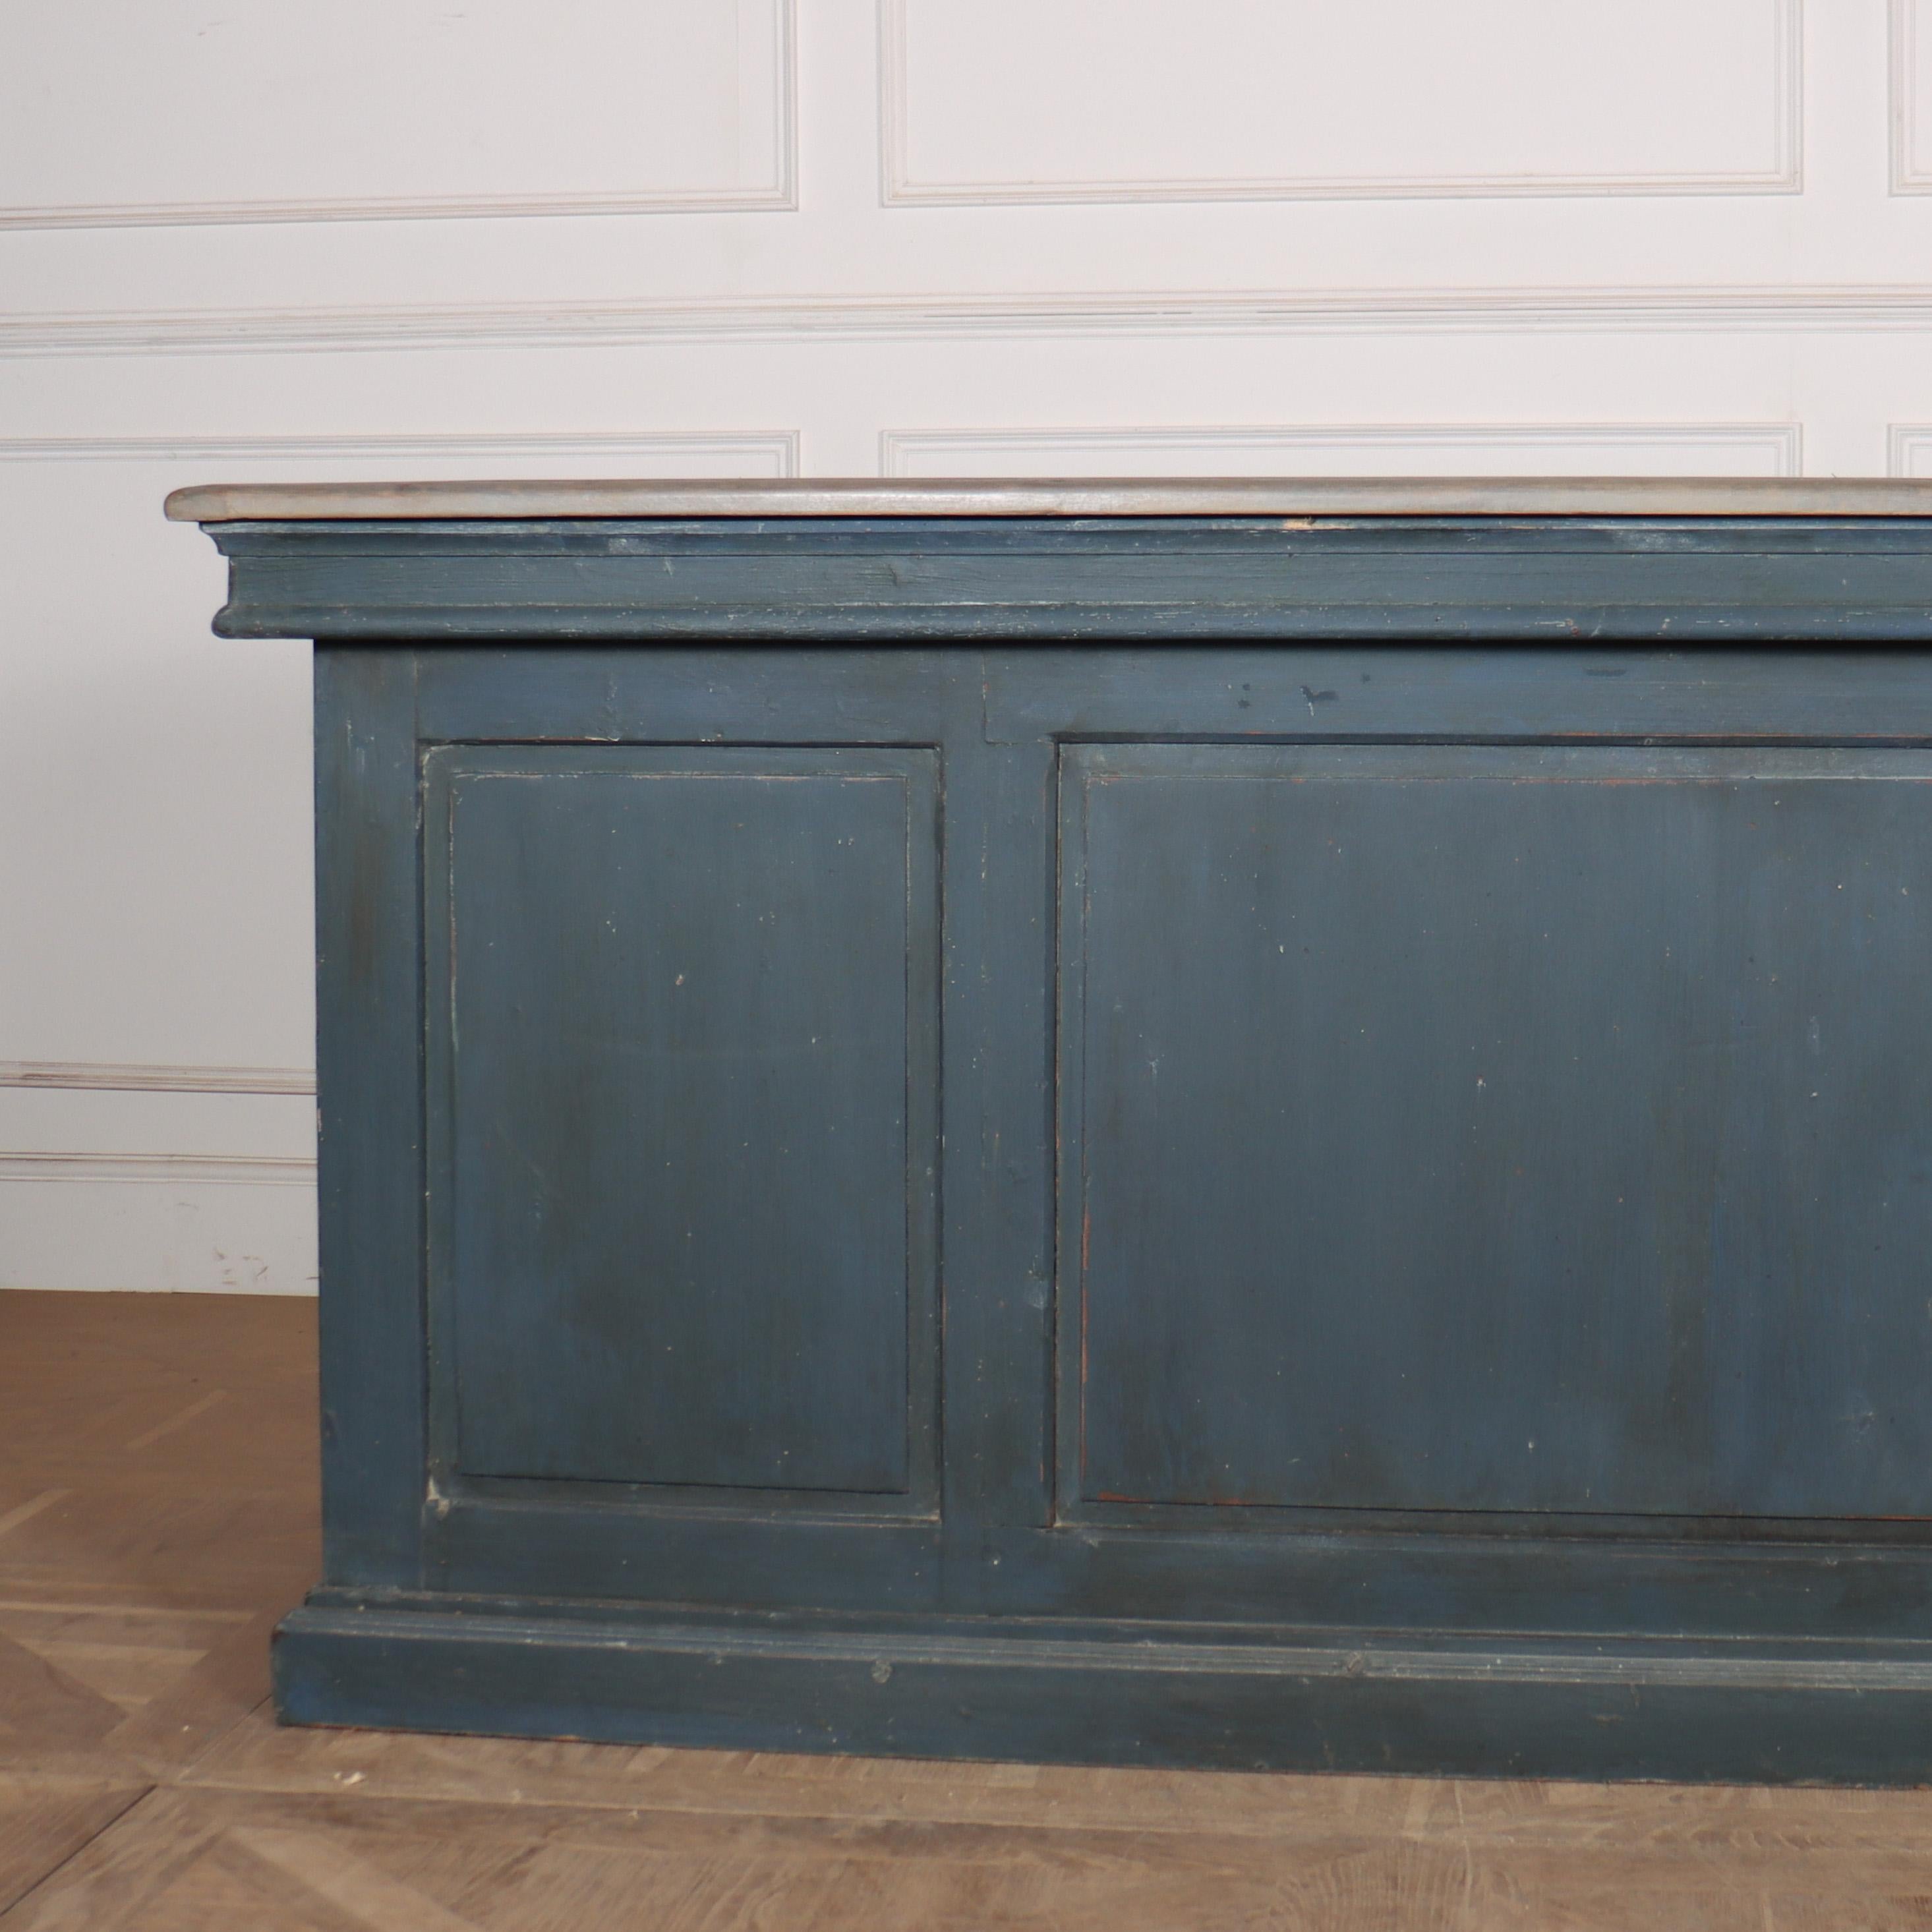 Large 19th C French painted pine shop counter / island unit. 1880.

Reference: 8138

Dimensions
95 inches (241 cms) Wide
32 inches (81 cms) Deep
37.5 inches (95 cms) High